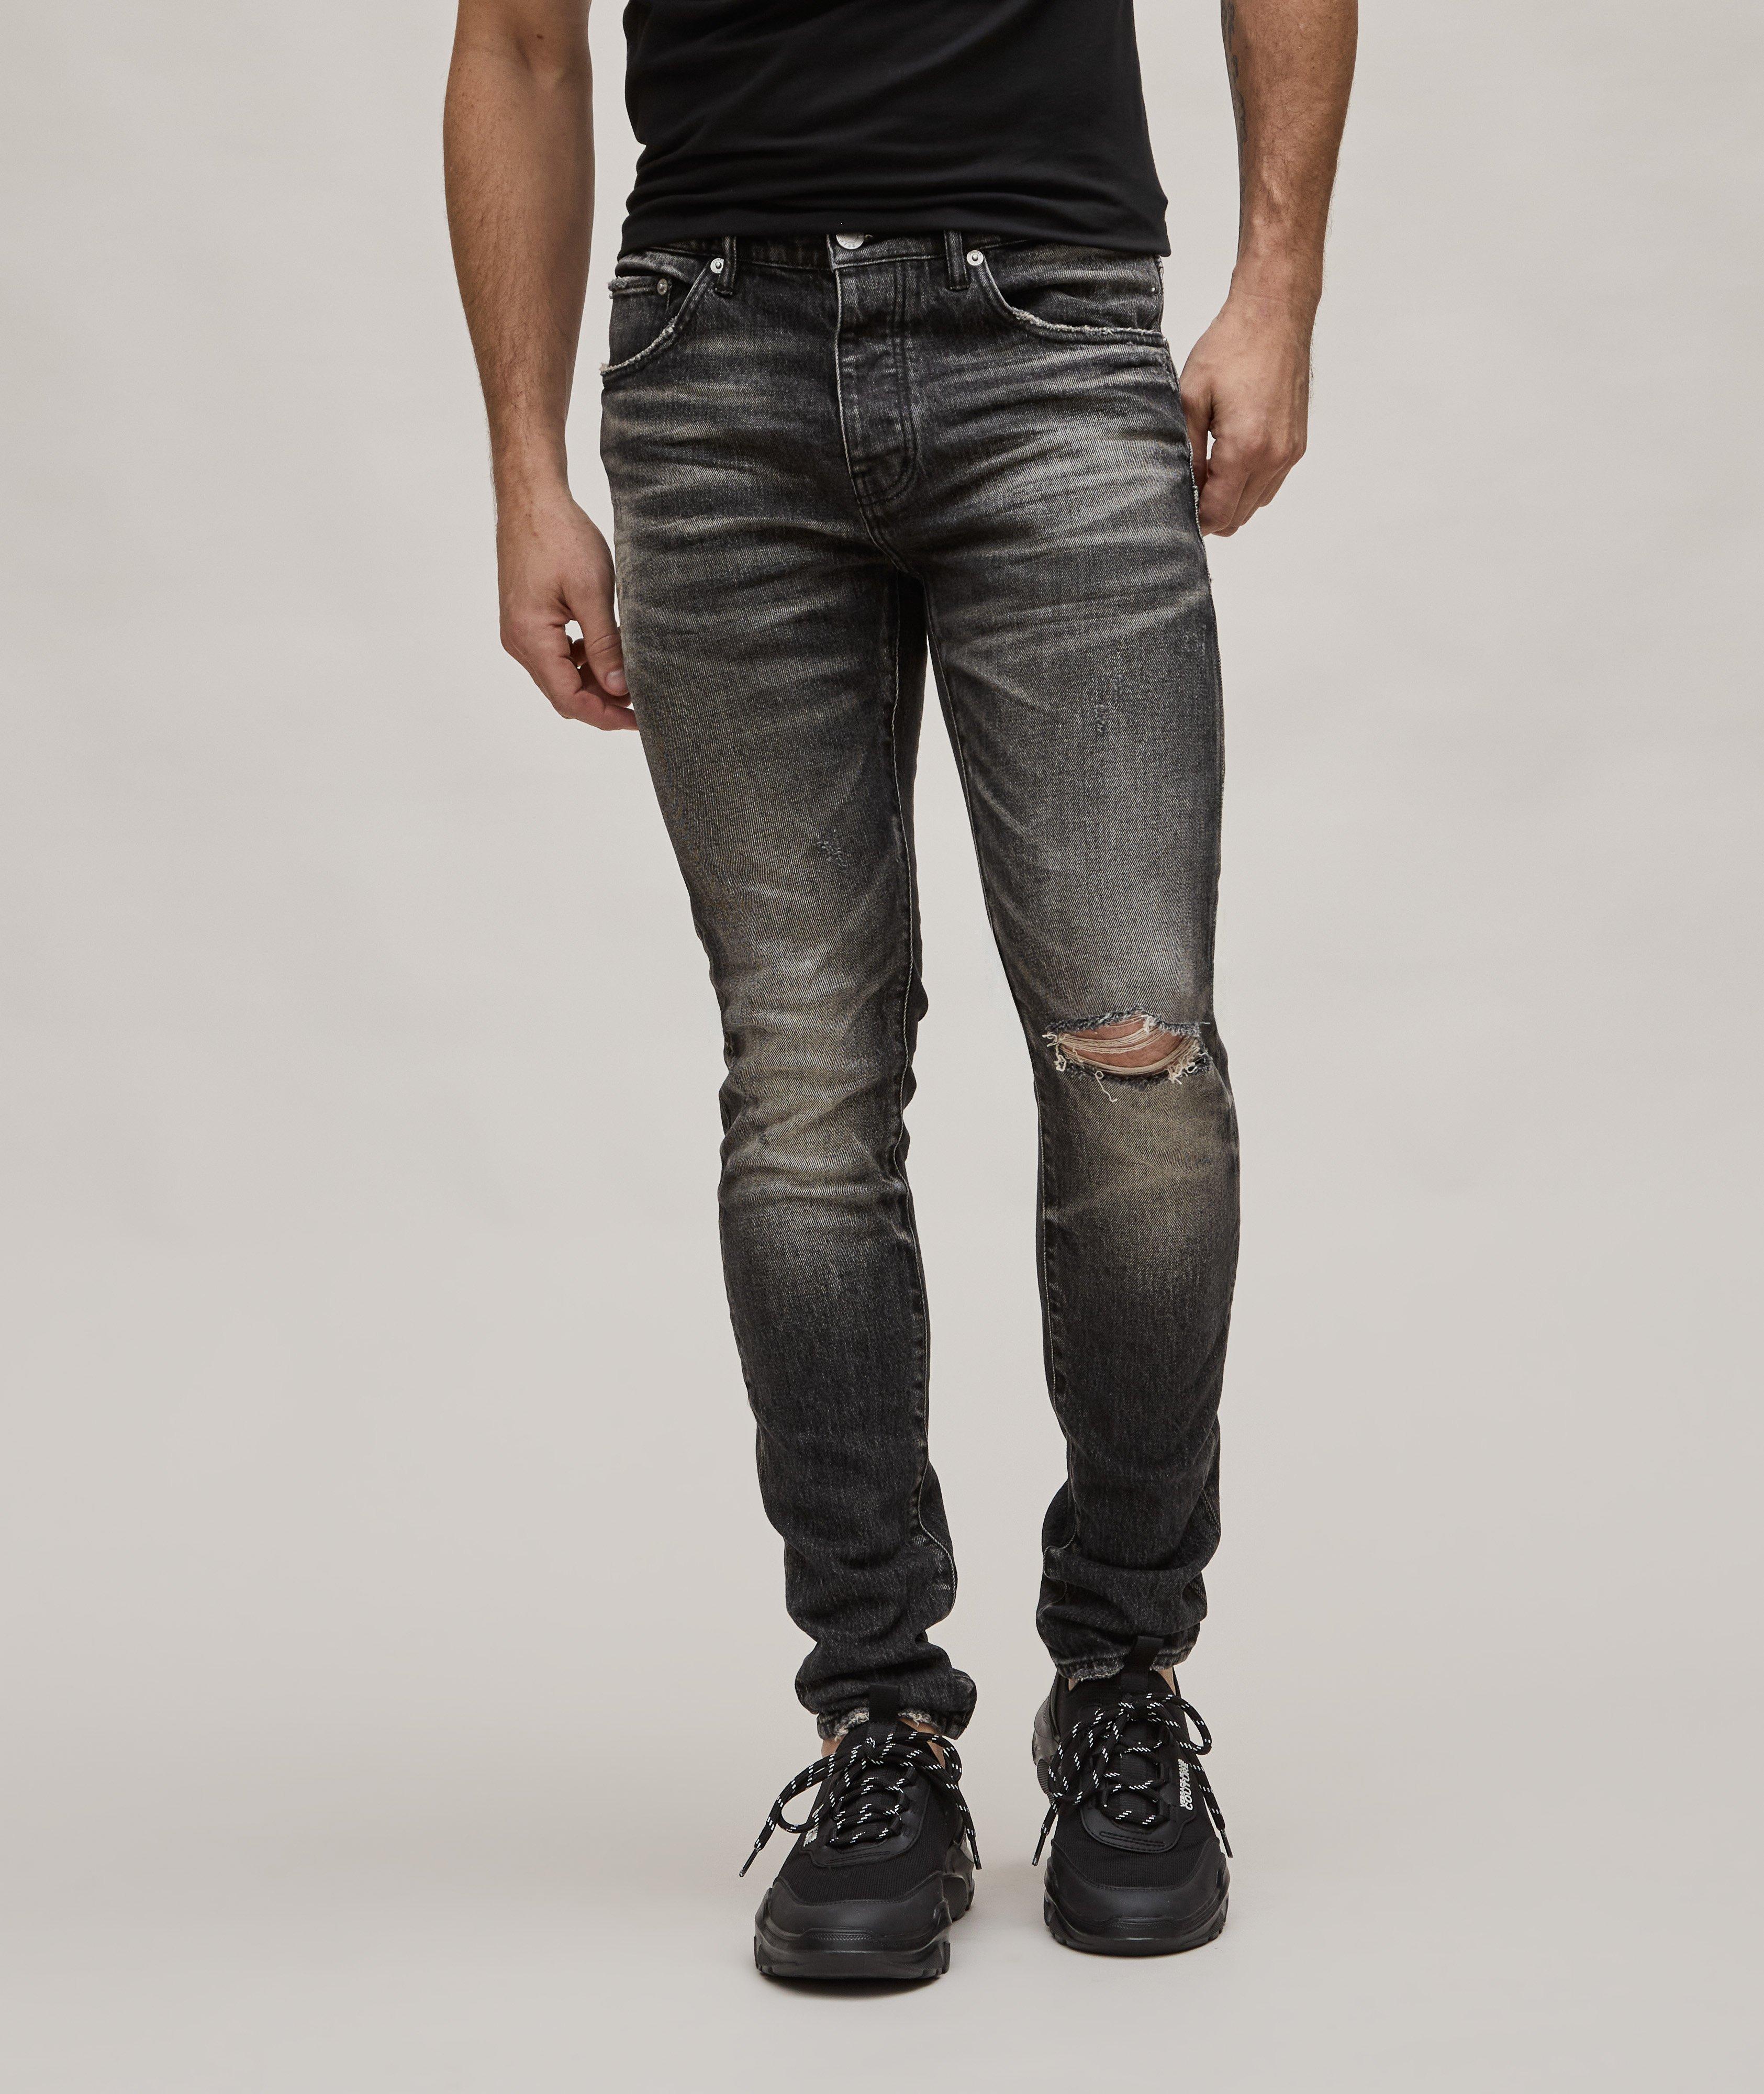 P001 2-Year Worn Distressed Jeans